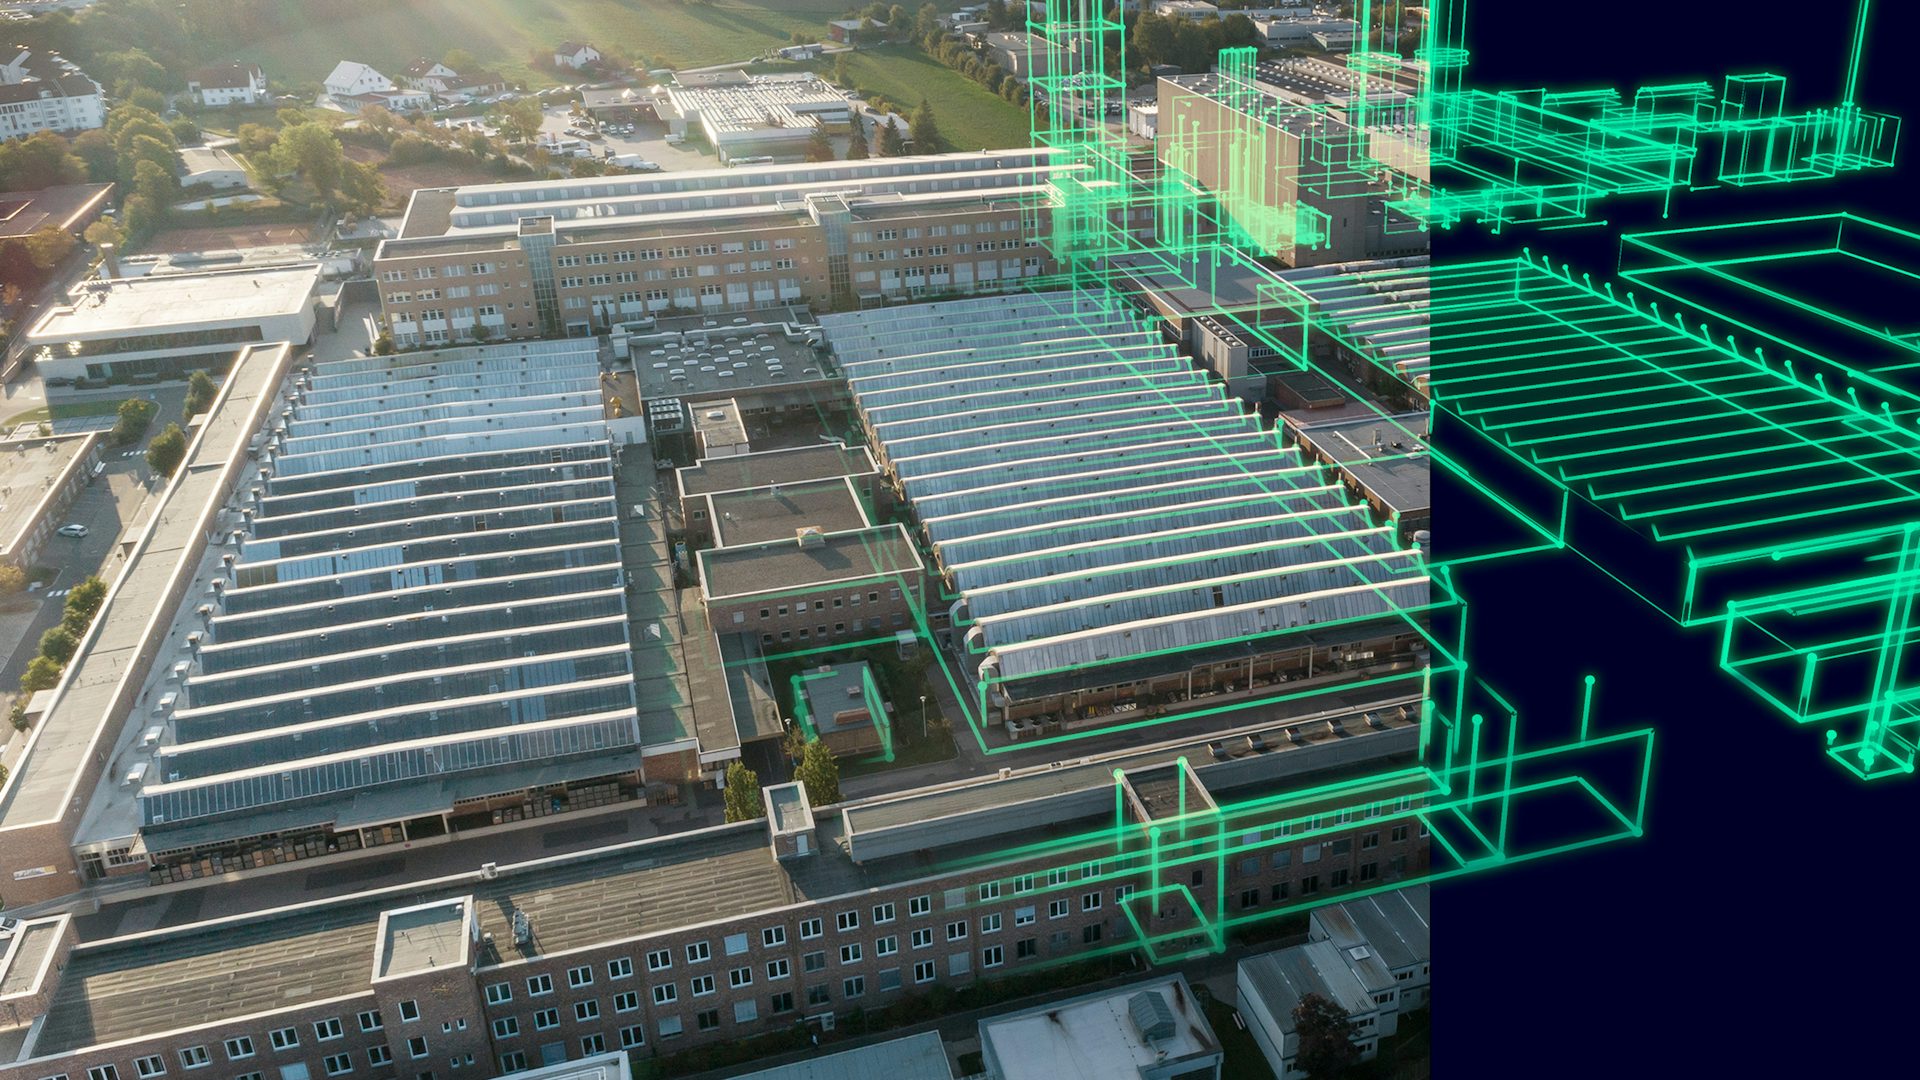 Image of the digital and real factory that together make up the Siemens comprehensive digital twin for manufacturing.